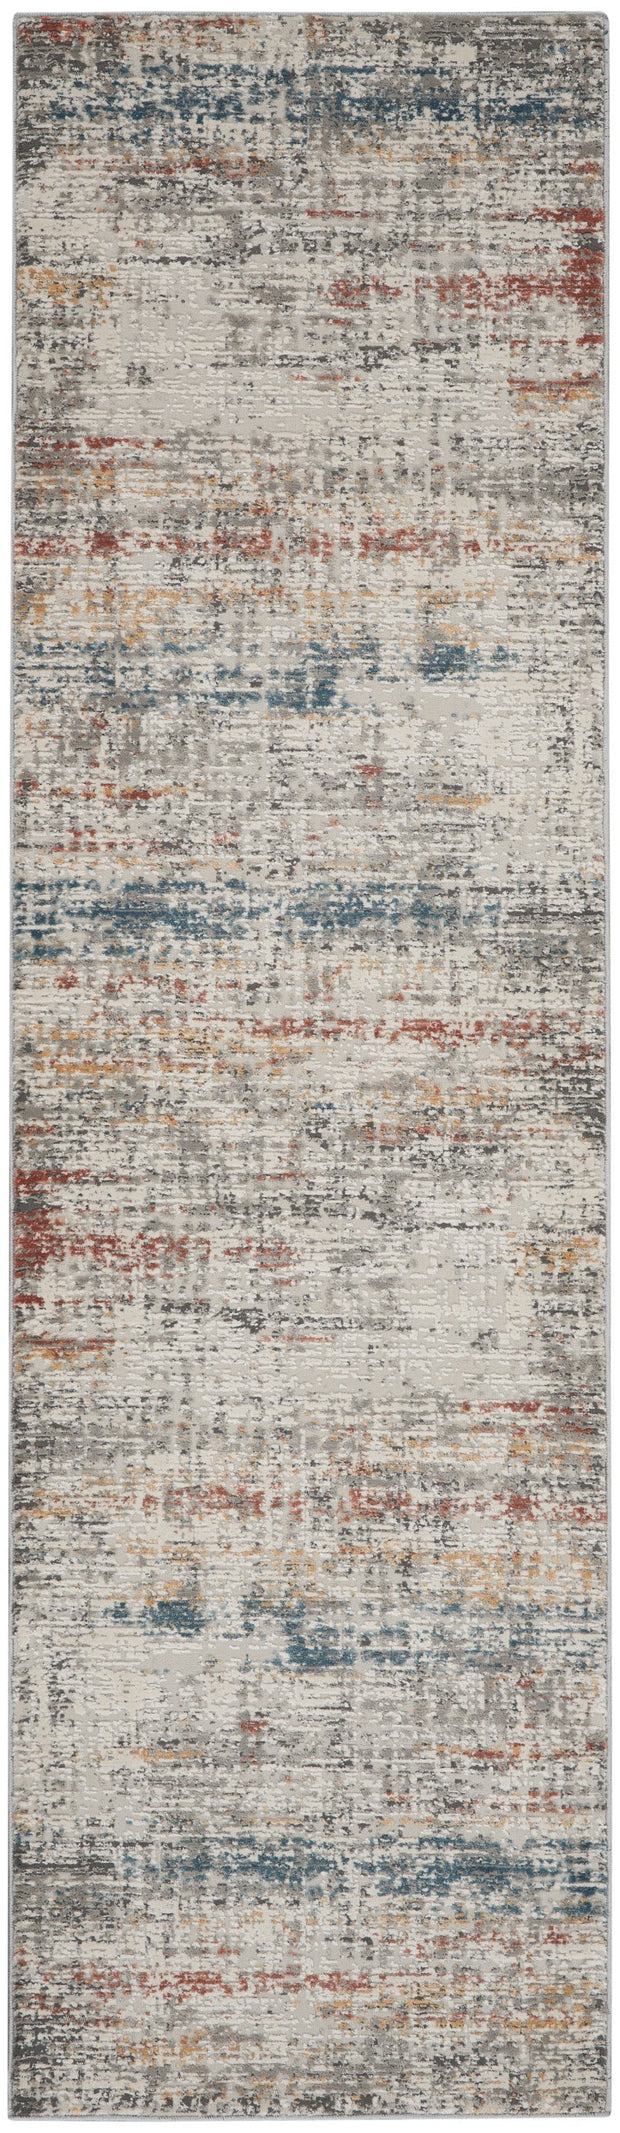 rustic textures light grey multi rug by nourison 99446799234 redo 3